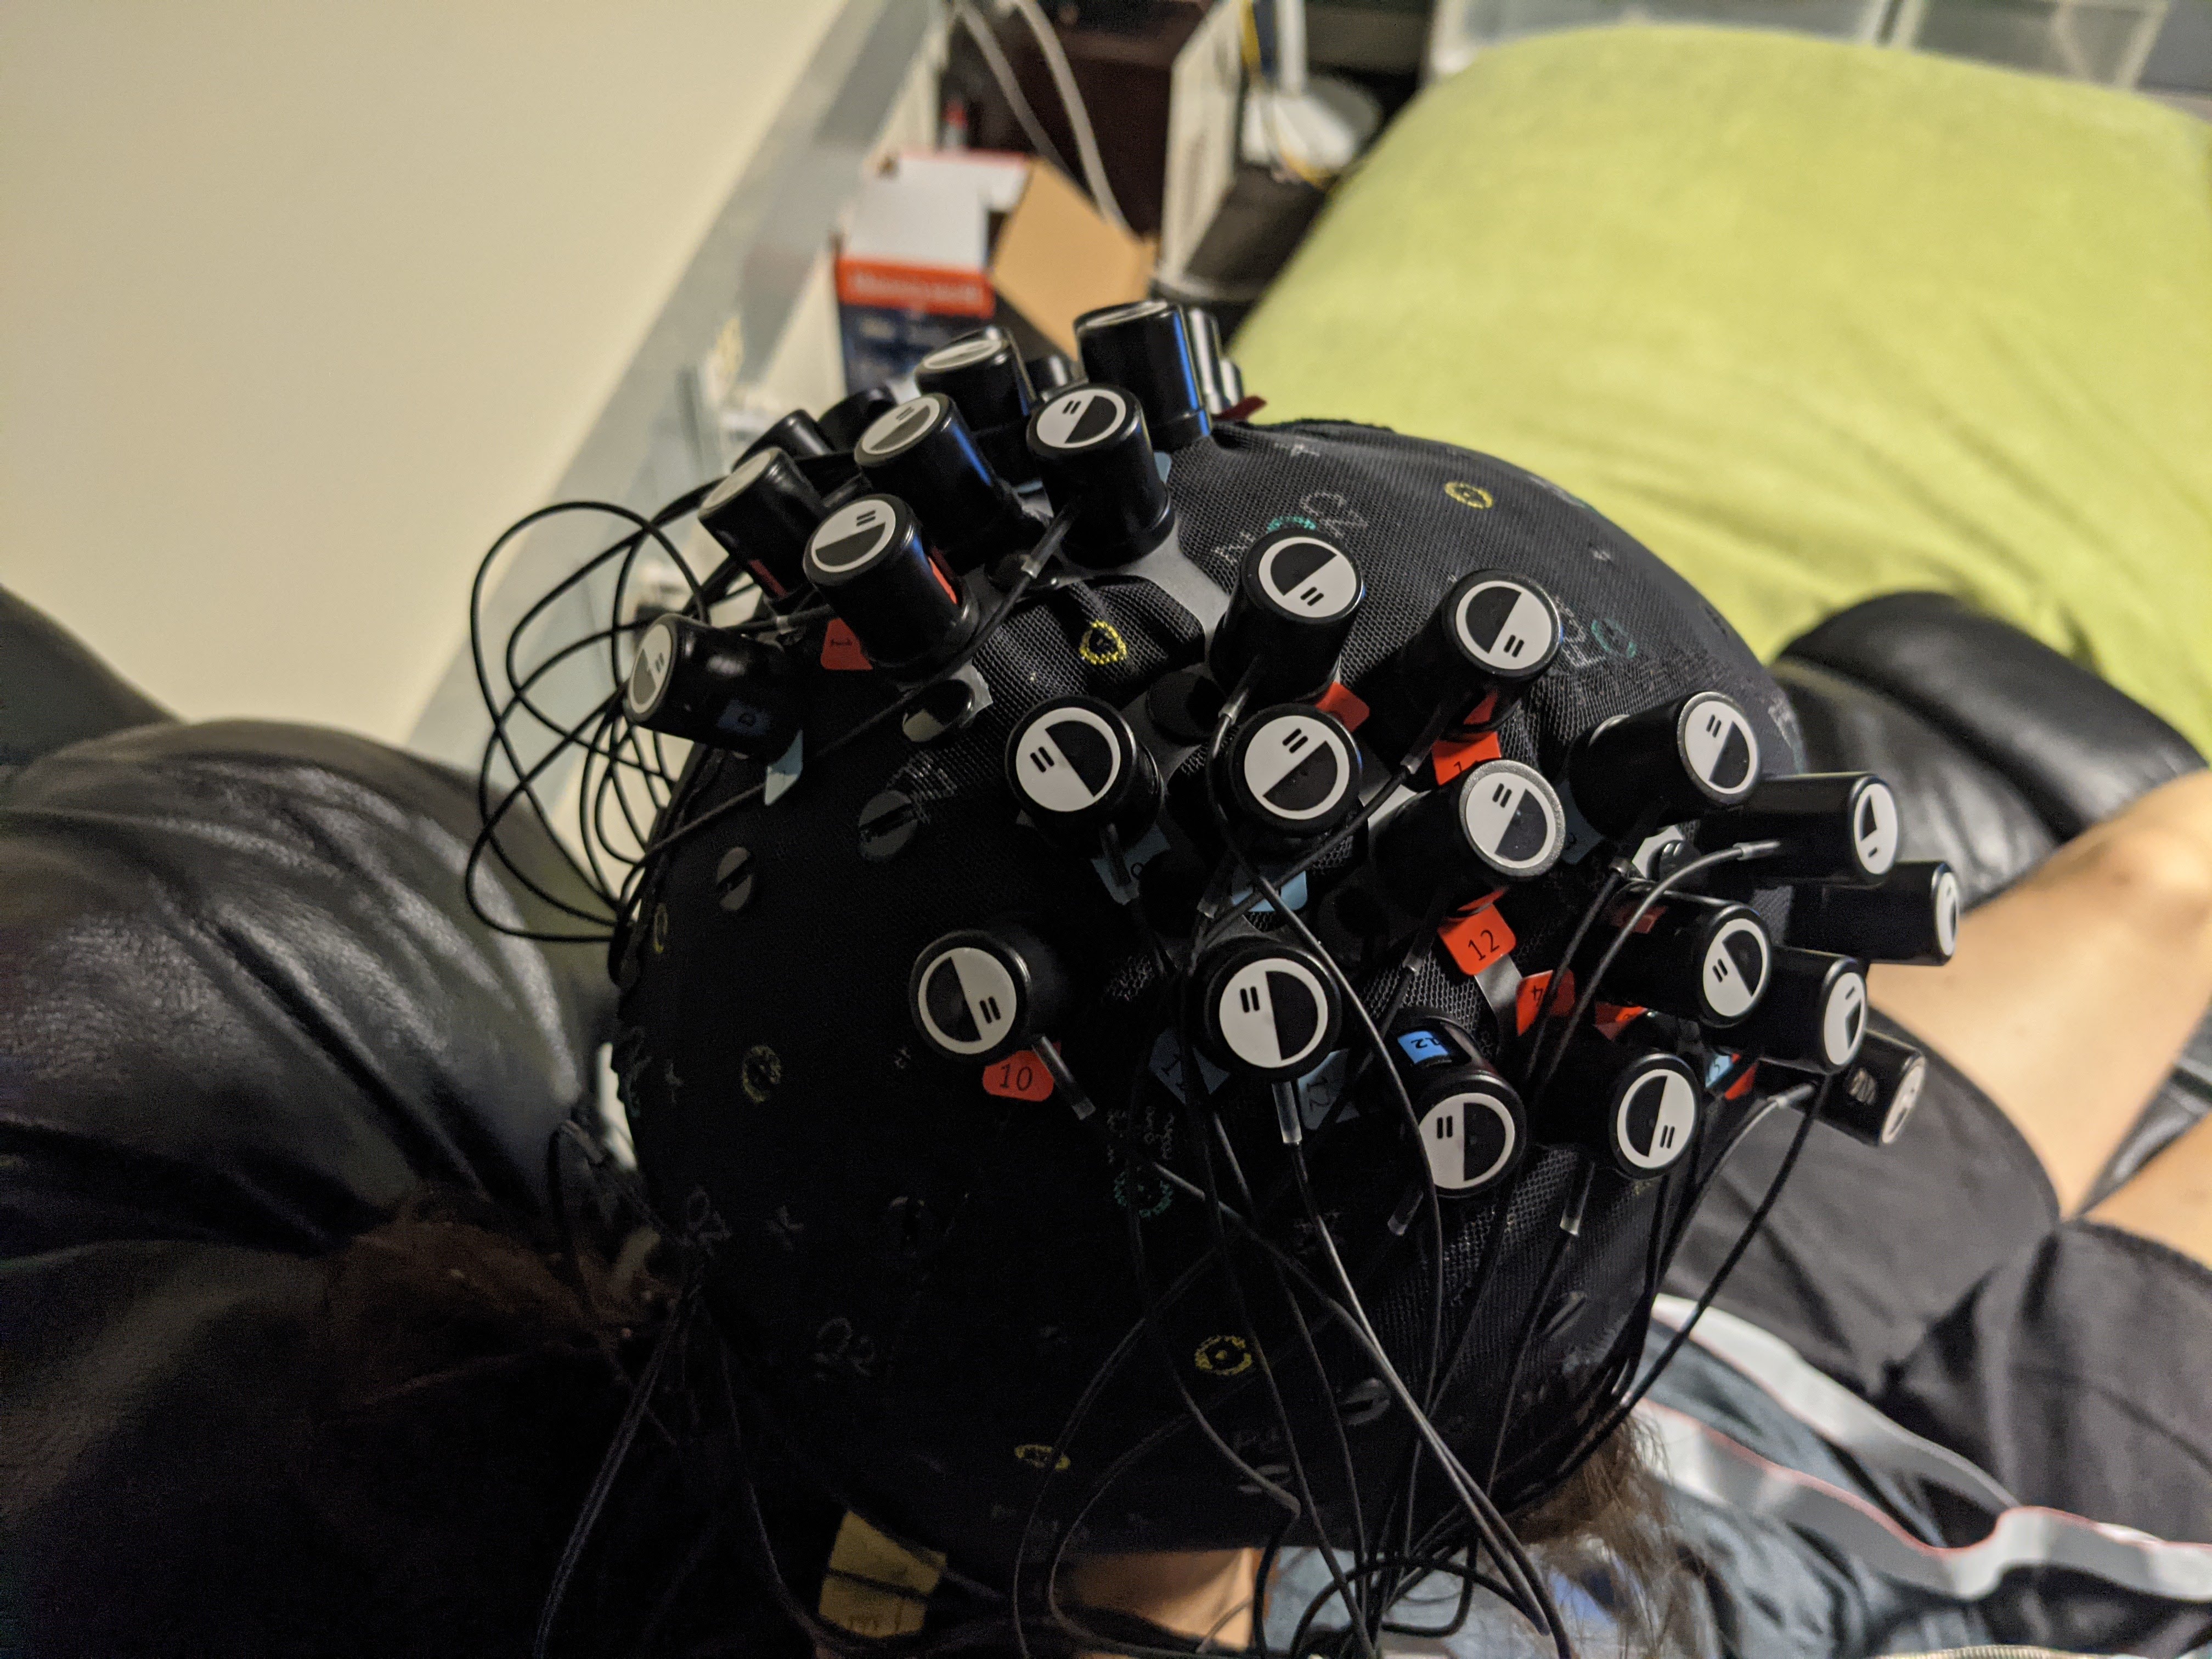 BrainBraille: A Passively Learnable Brain Computer Interface using fNIRS